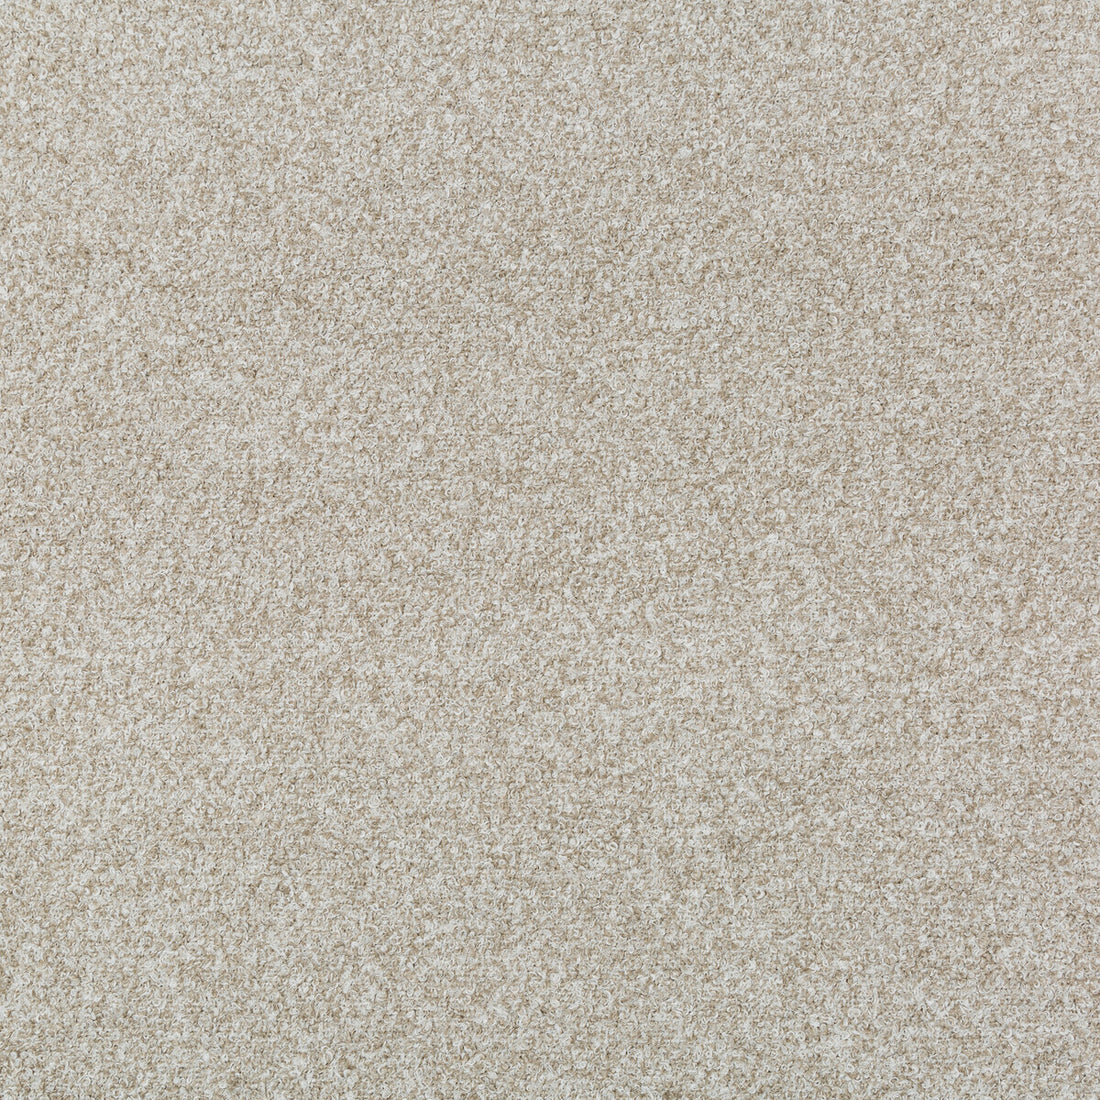 Vista Boucle fabric in sand color - pattern 35499.16.0 - by Kravet Couture in the Vista collection